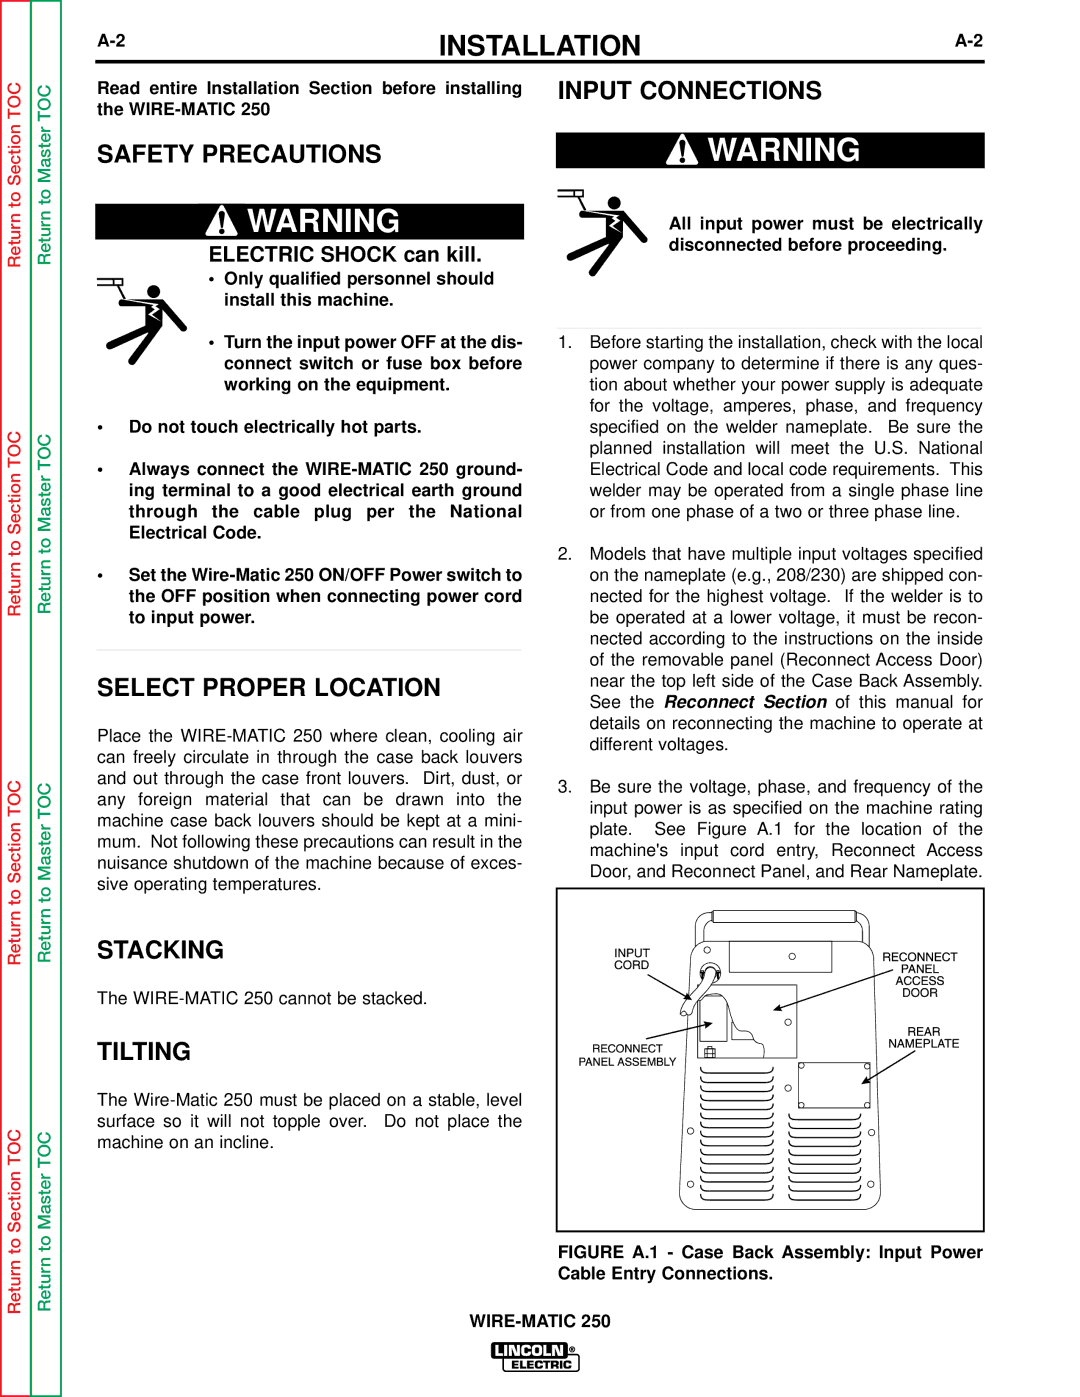 Lincoln Electric SVM 117-A service manual Safety Precautions, Select Proper Location, Input Connections, Stacking, Tilting 